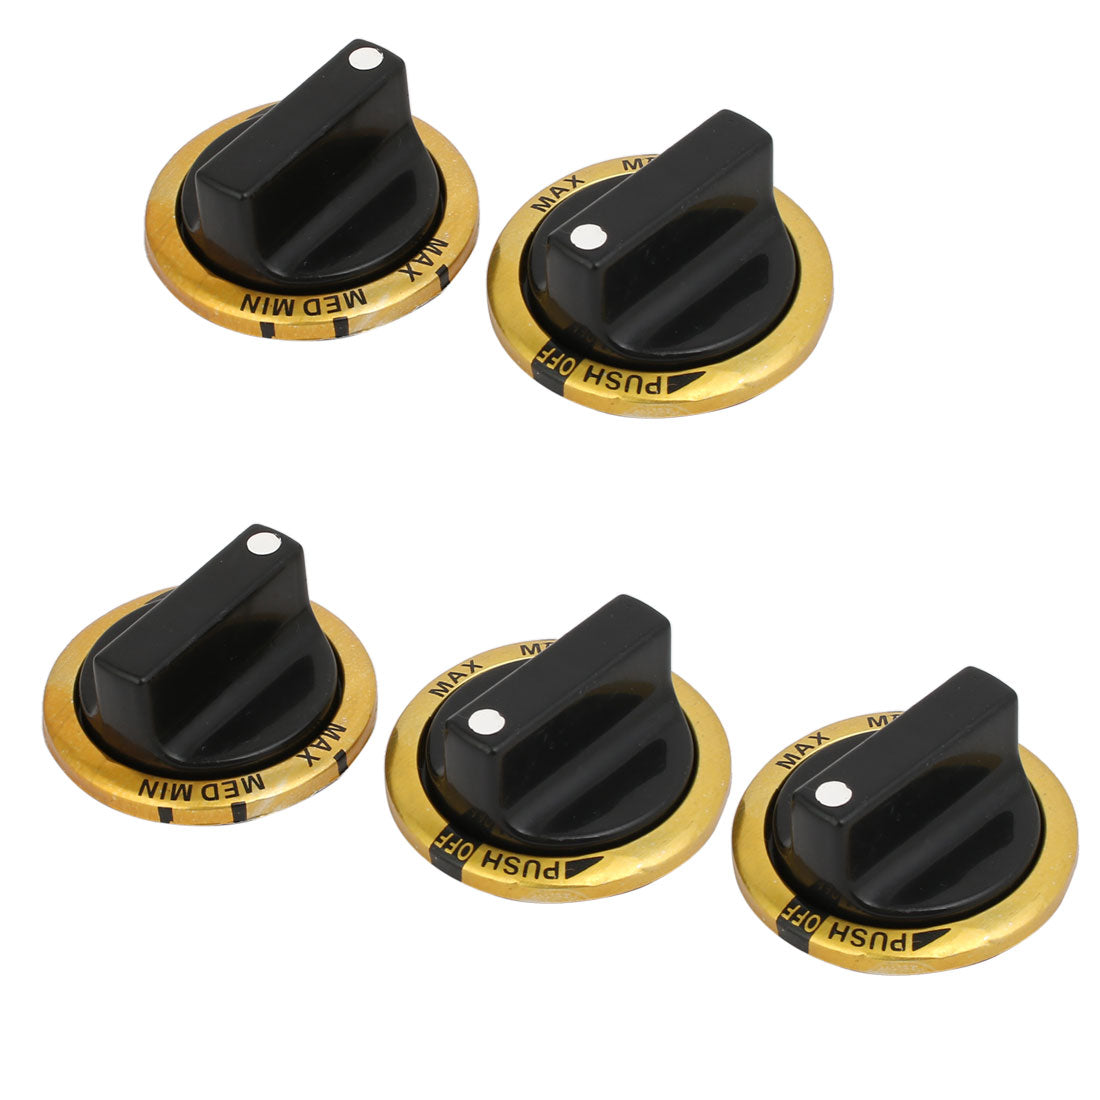 uxcell Uxcell Home Kitchen Plastic Control Rotary Switch Knob Black 5pcs